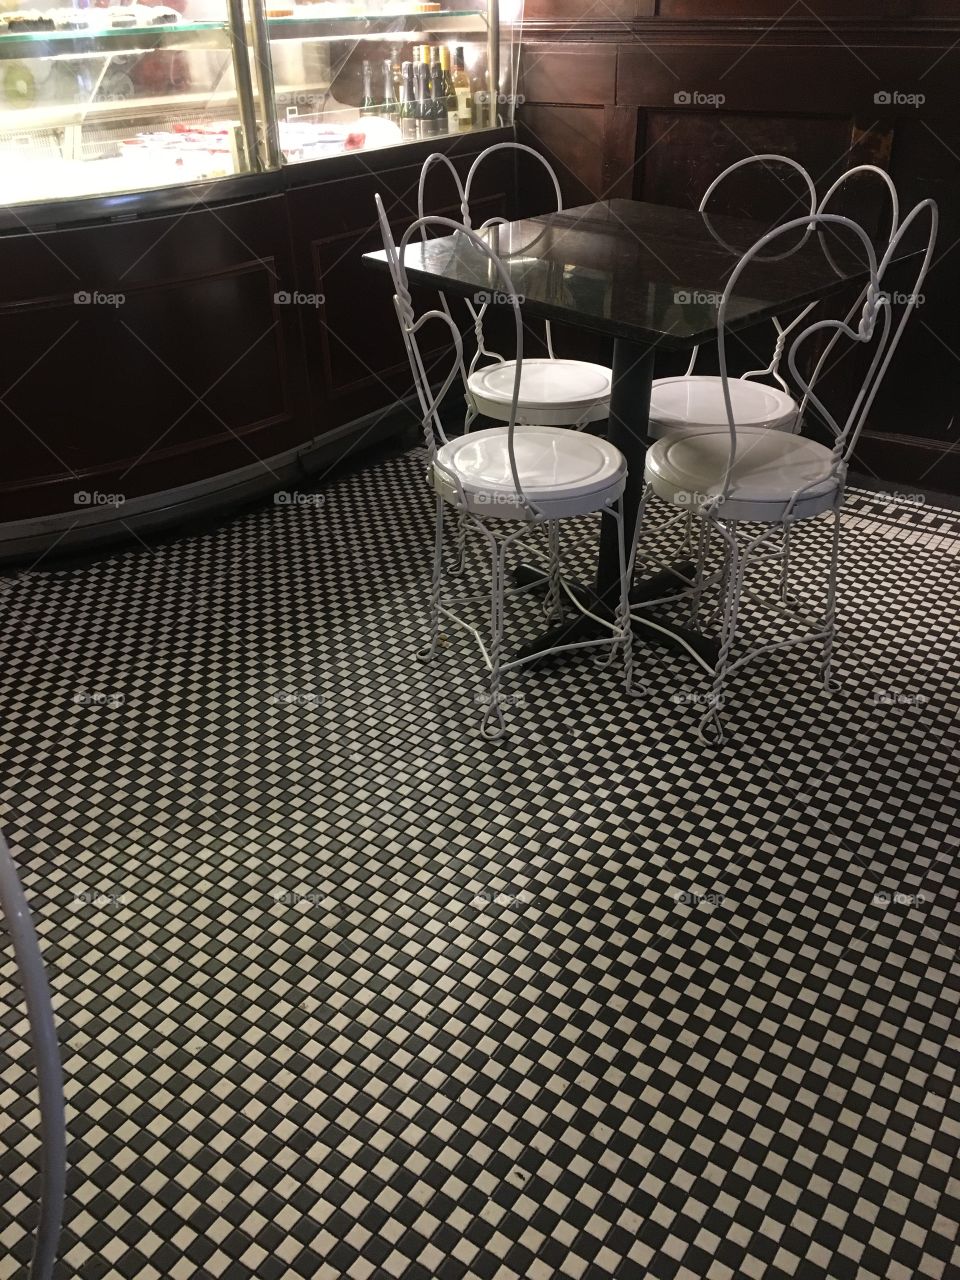 Table in a French Quarter cafe. 